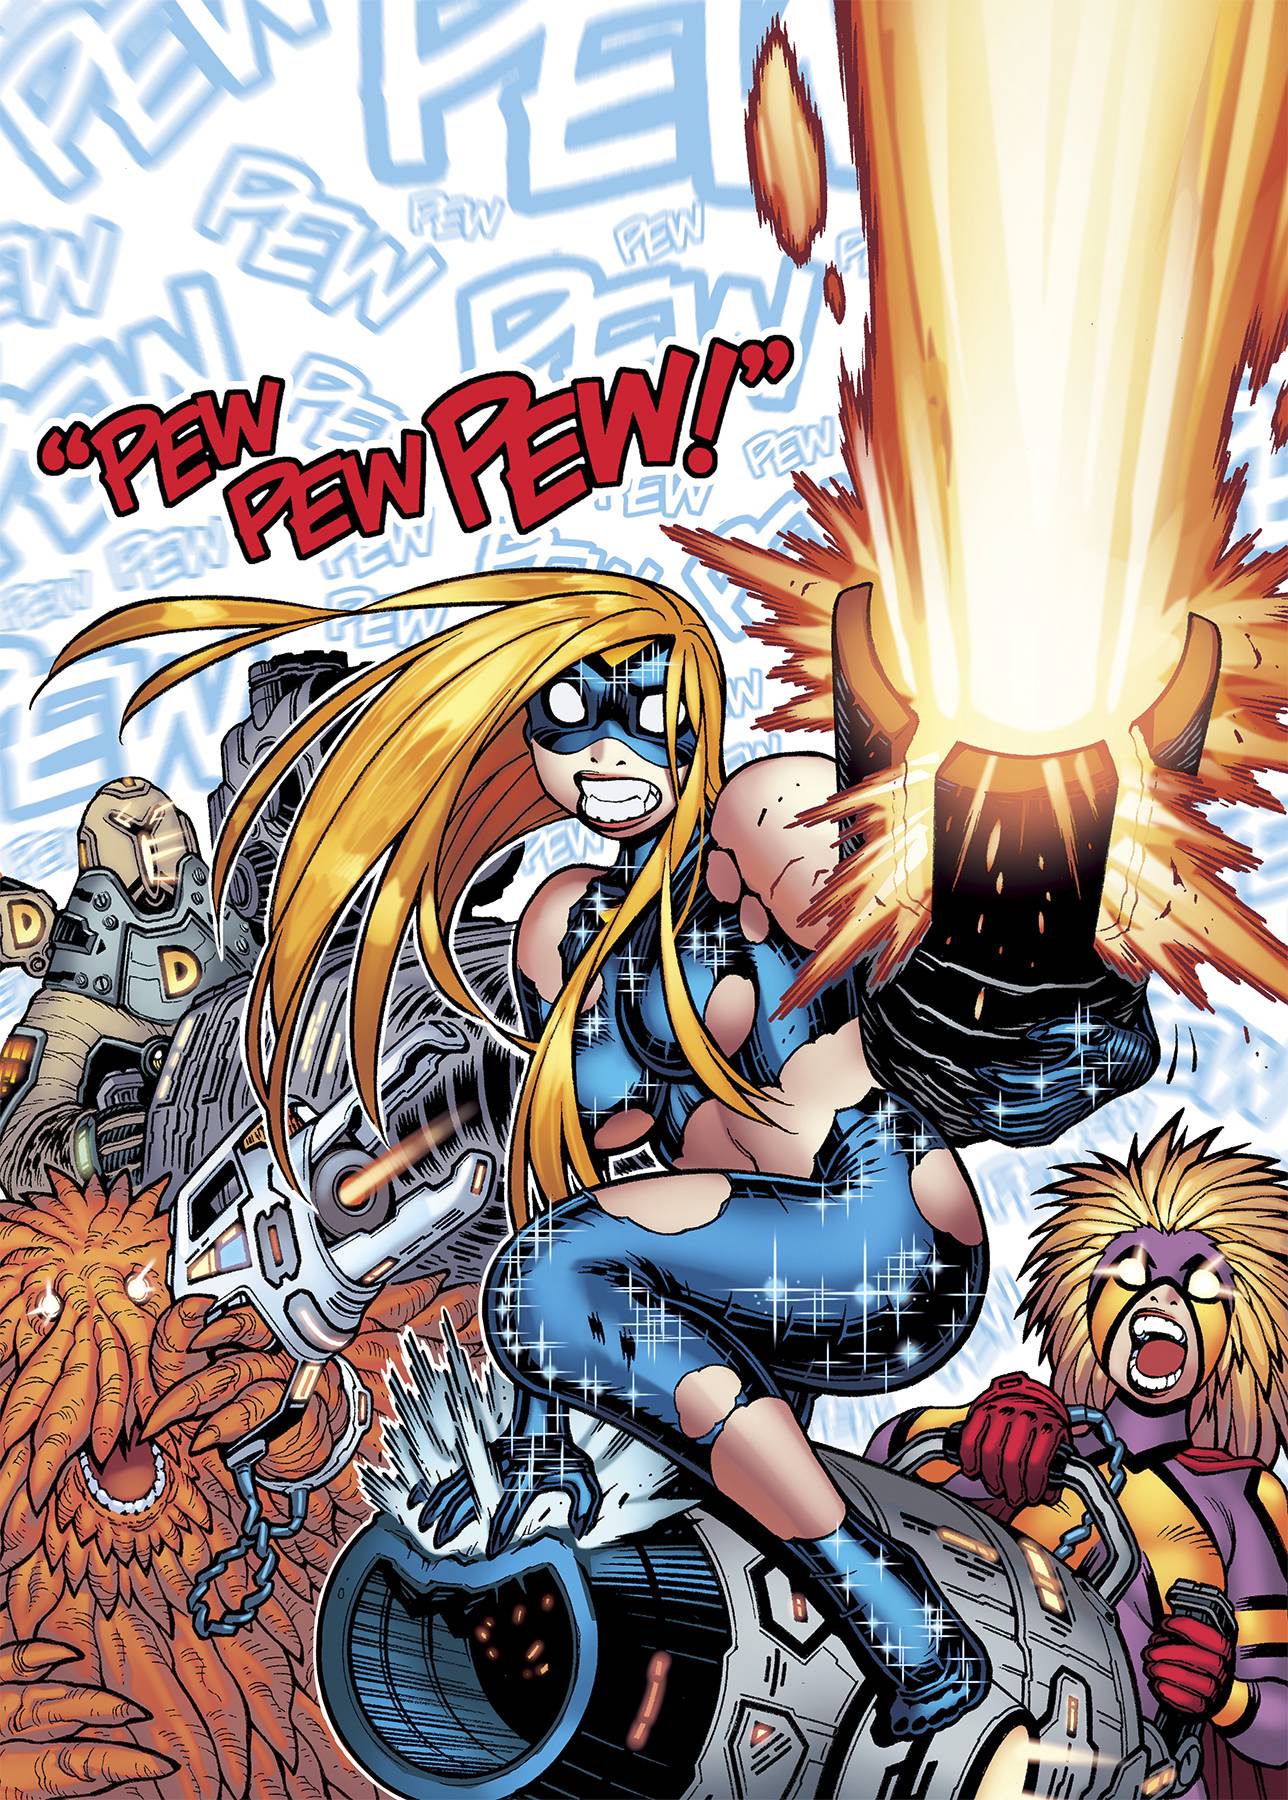 Empowered Special #7 Pew Pew Pew